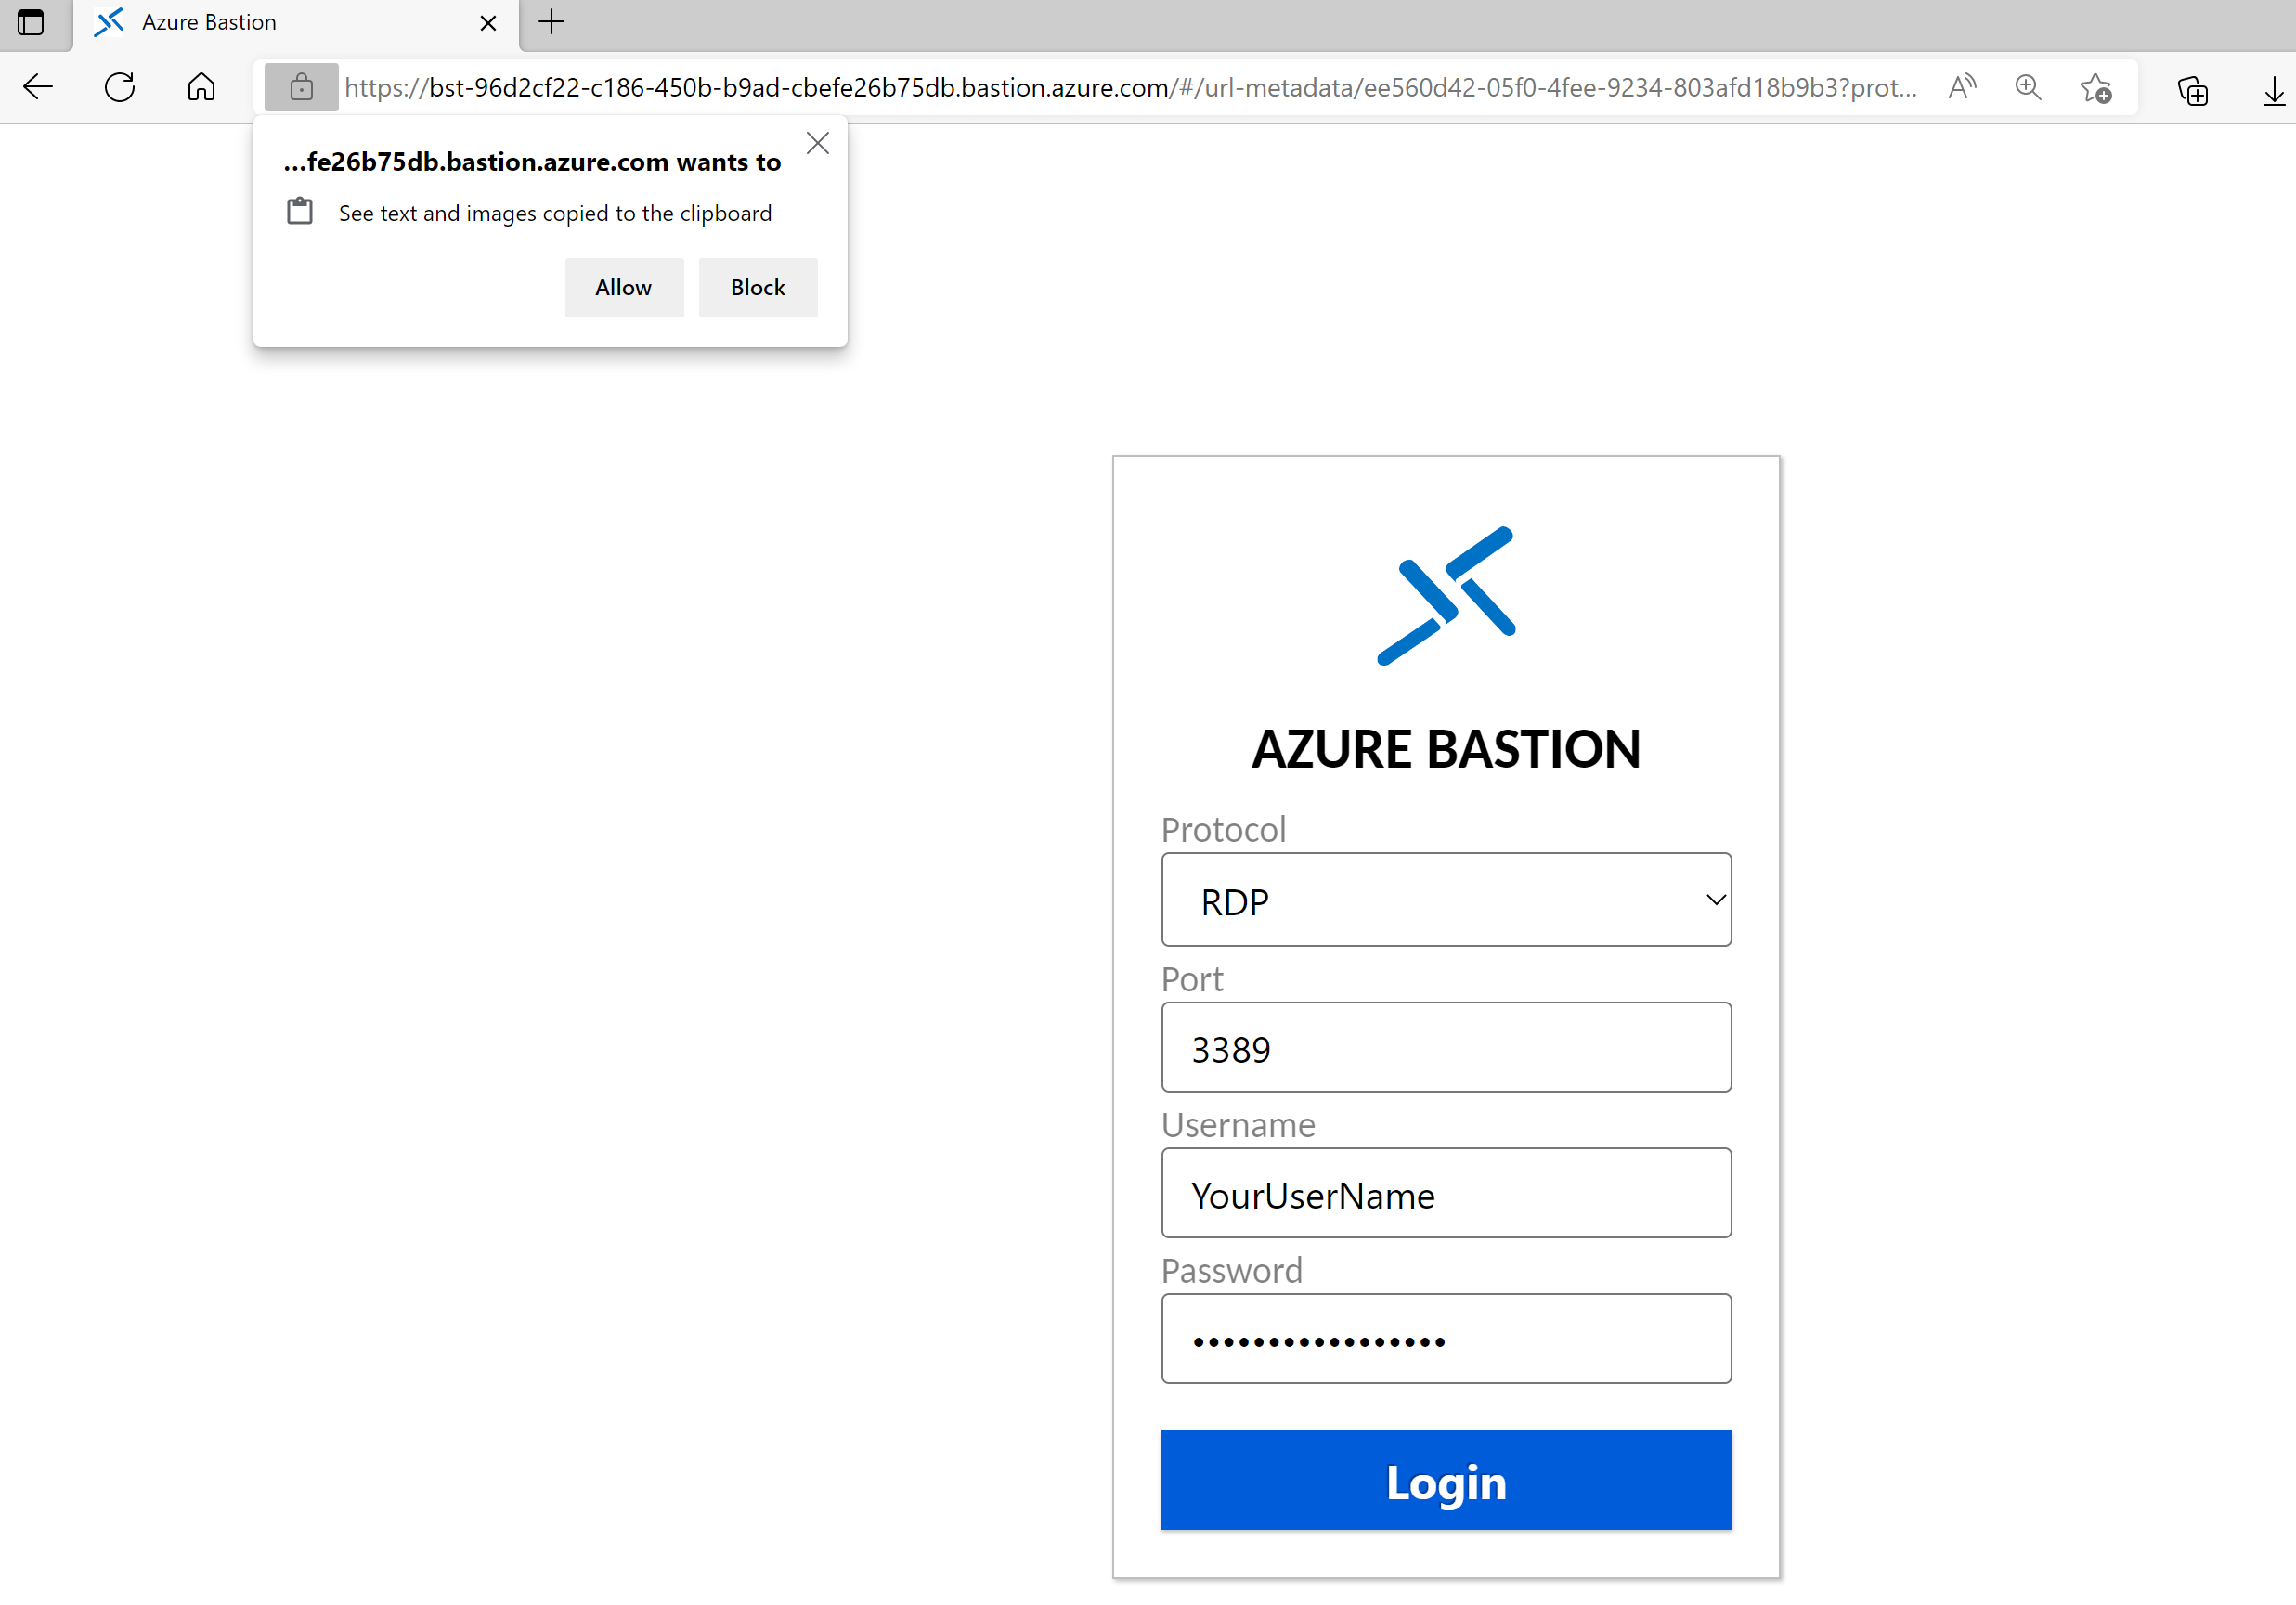 Screenshot of Sign-in to bastion using the shareable link in the browser.